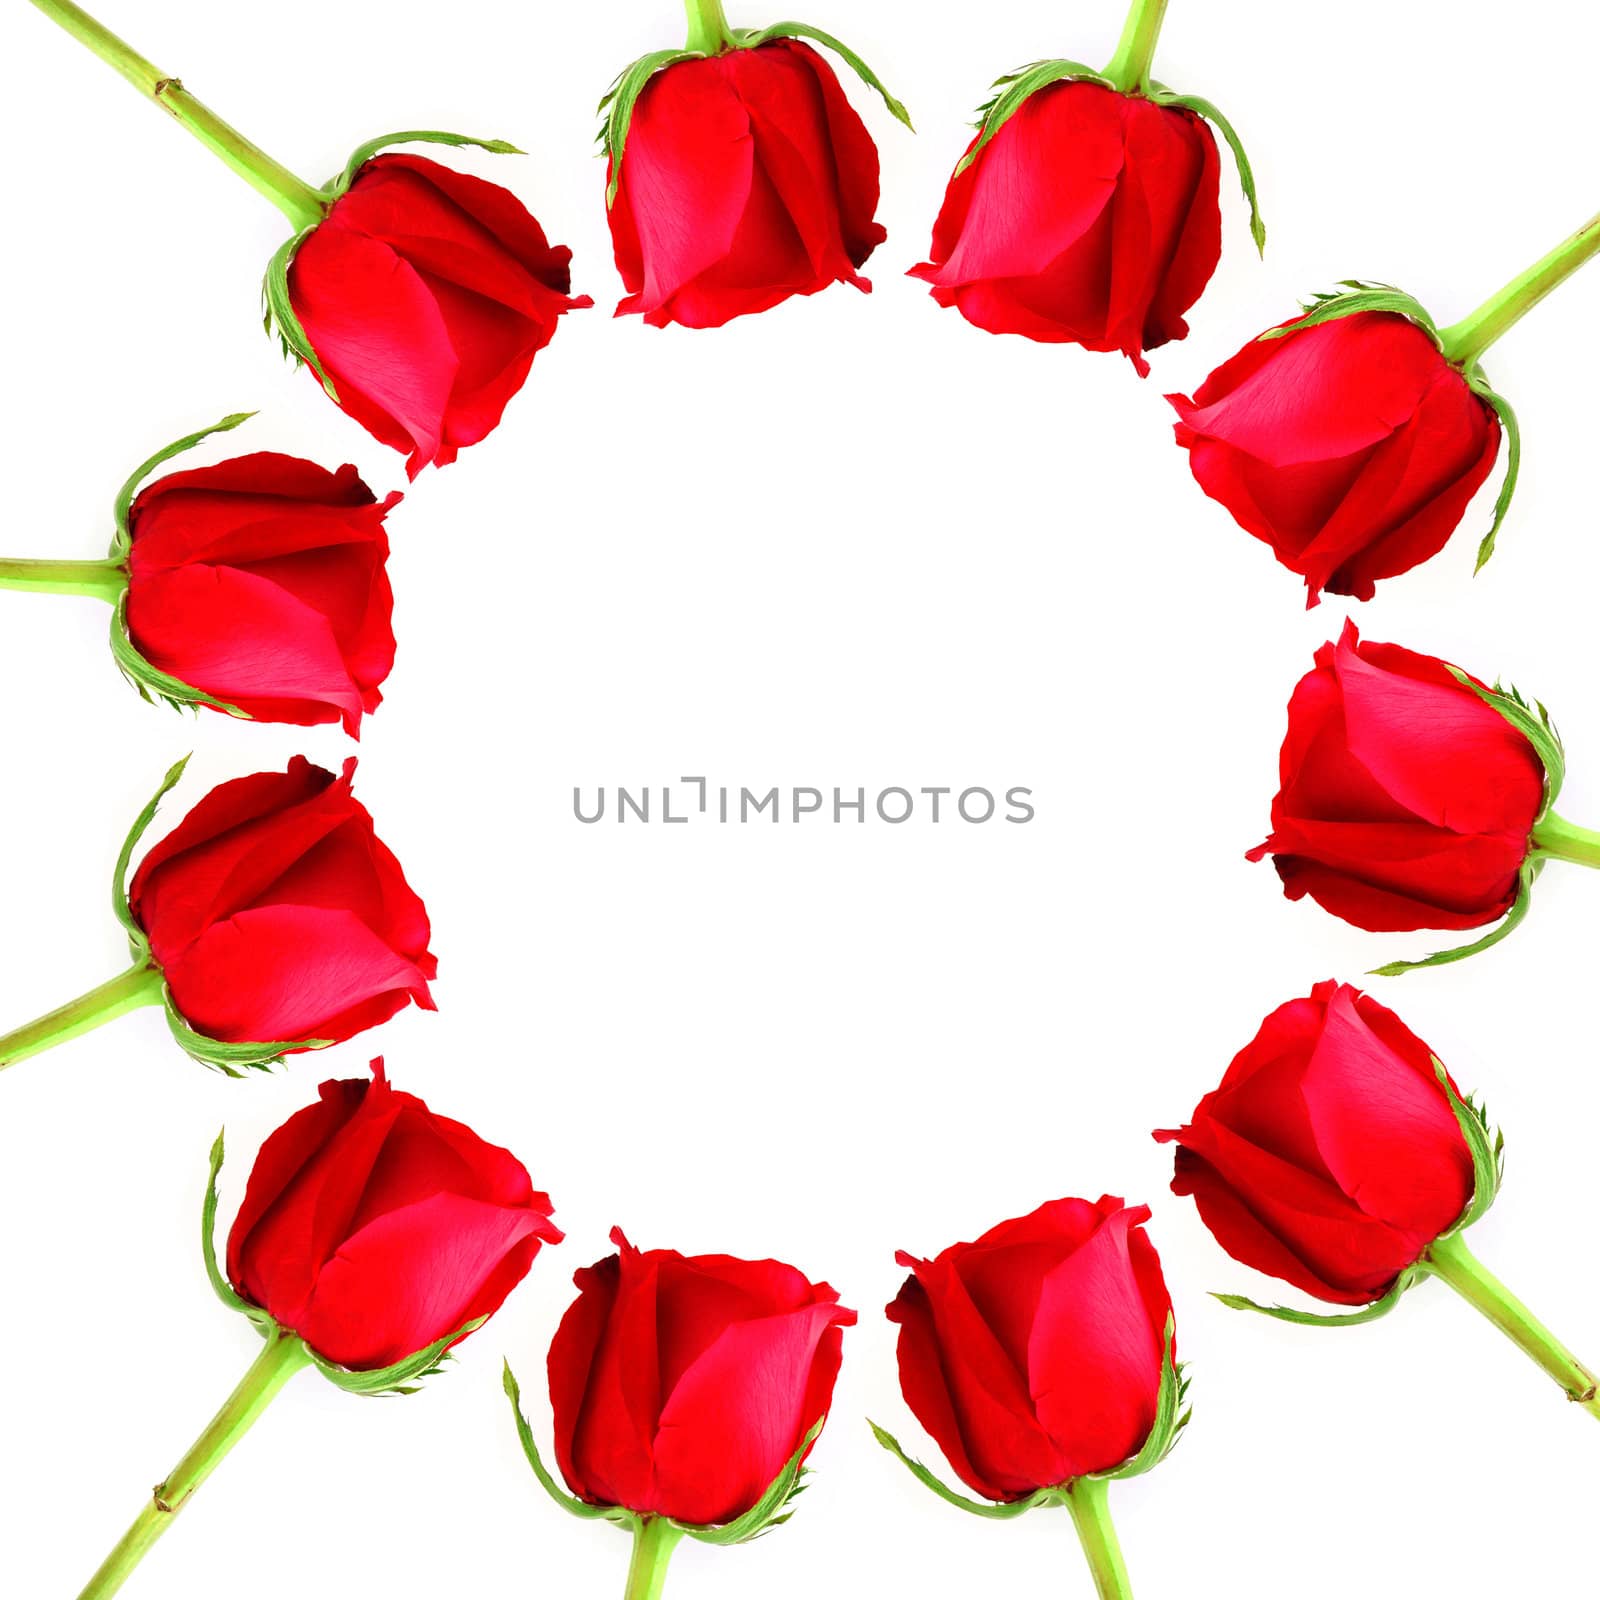 Red Rose frame as circle on white background by nuchylee